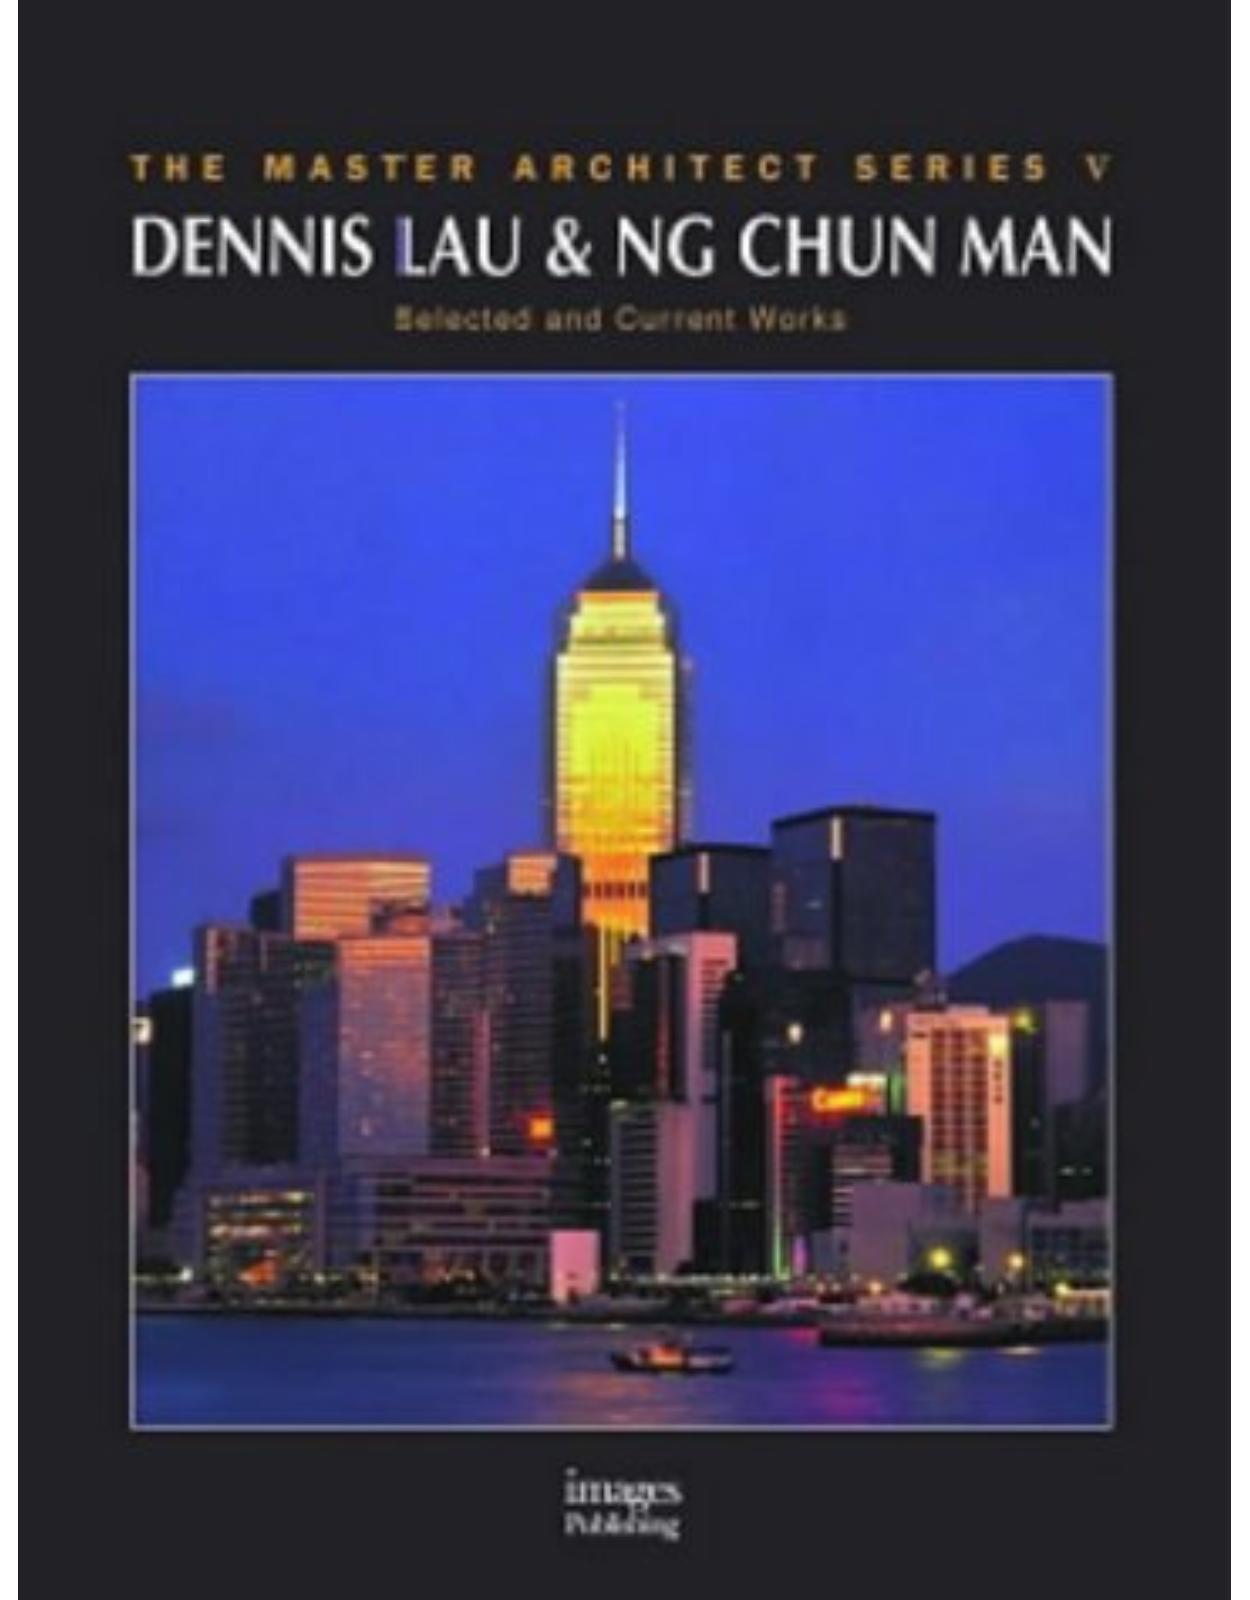 Dennis Lau and Ng Chun Man: Selected and Current Works (Master Architect Series V)